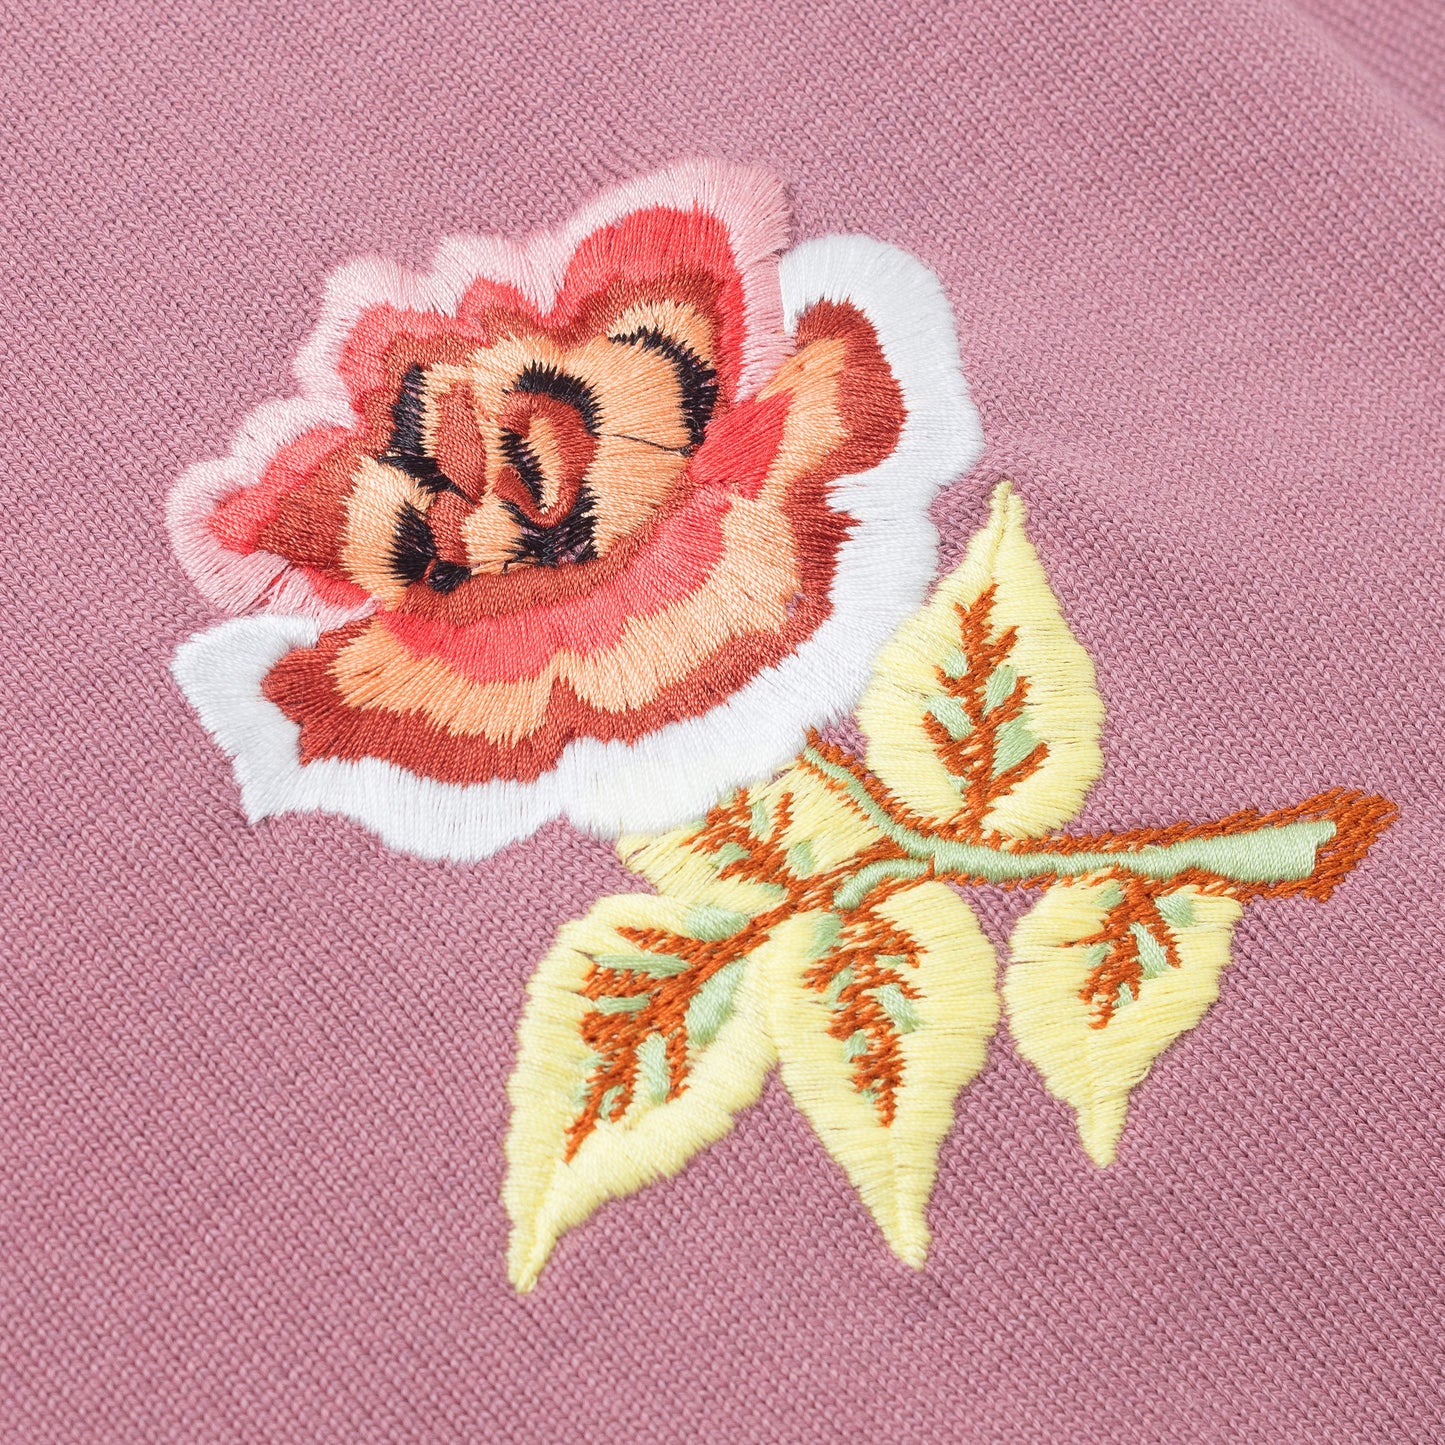 Detail of embroidered rose.